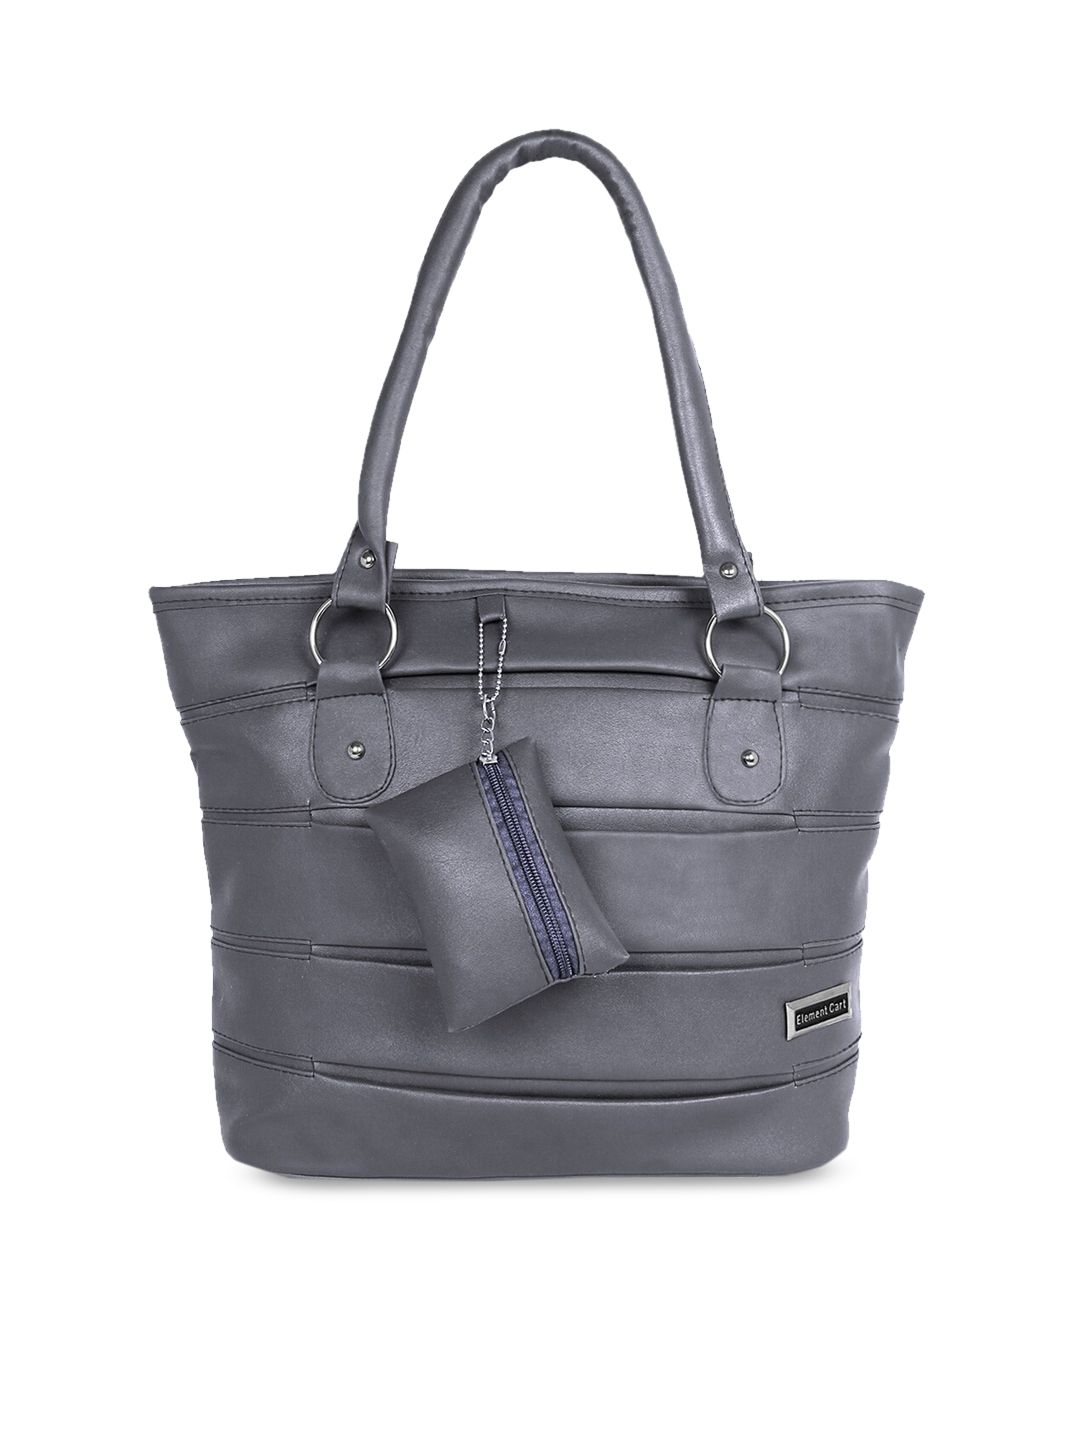 Stropcarry Grey Solid Shoulder Bag With Pouch Price in India